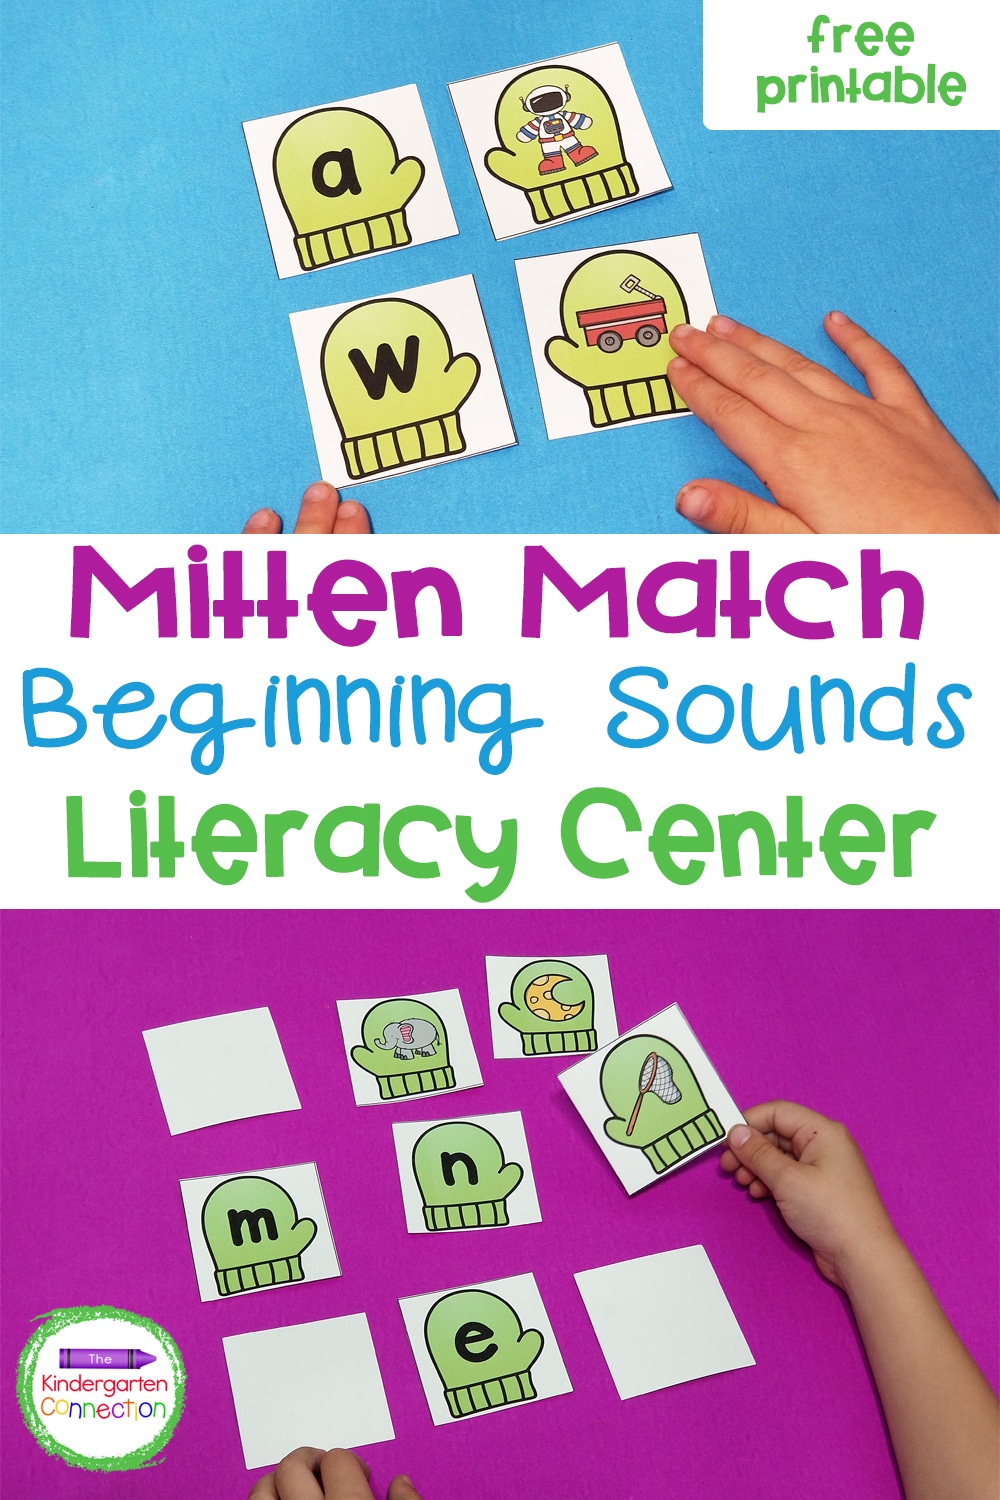 Practice beginning sounds in a fun, seasonal way with this free Mitten Match Beginning Sounds Game! It's perfect for your literacy centers!